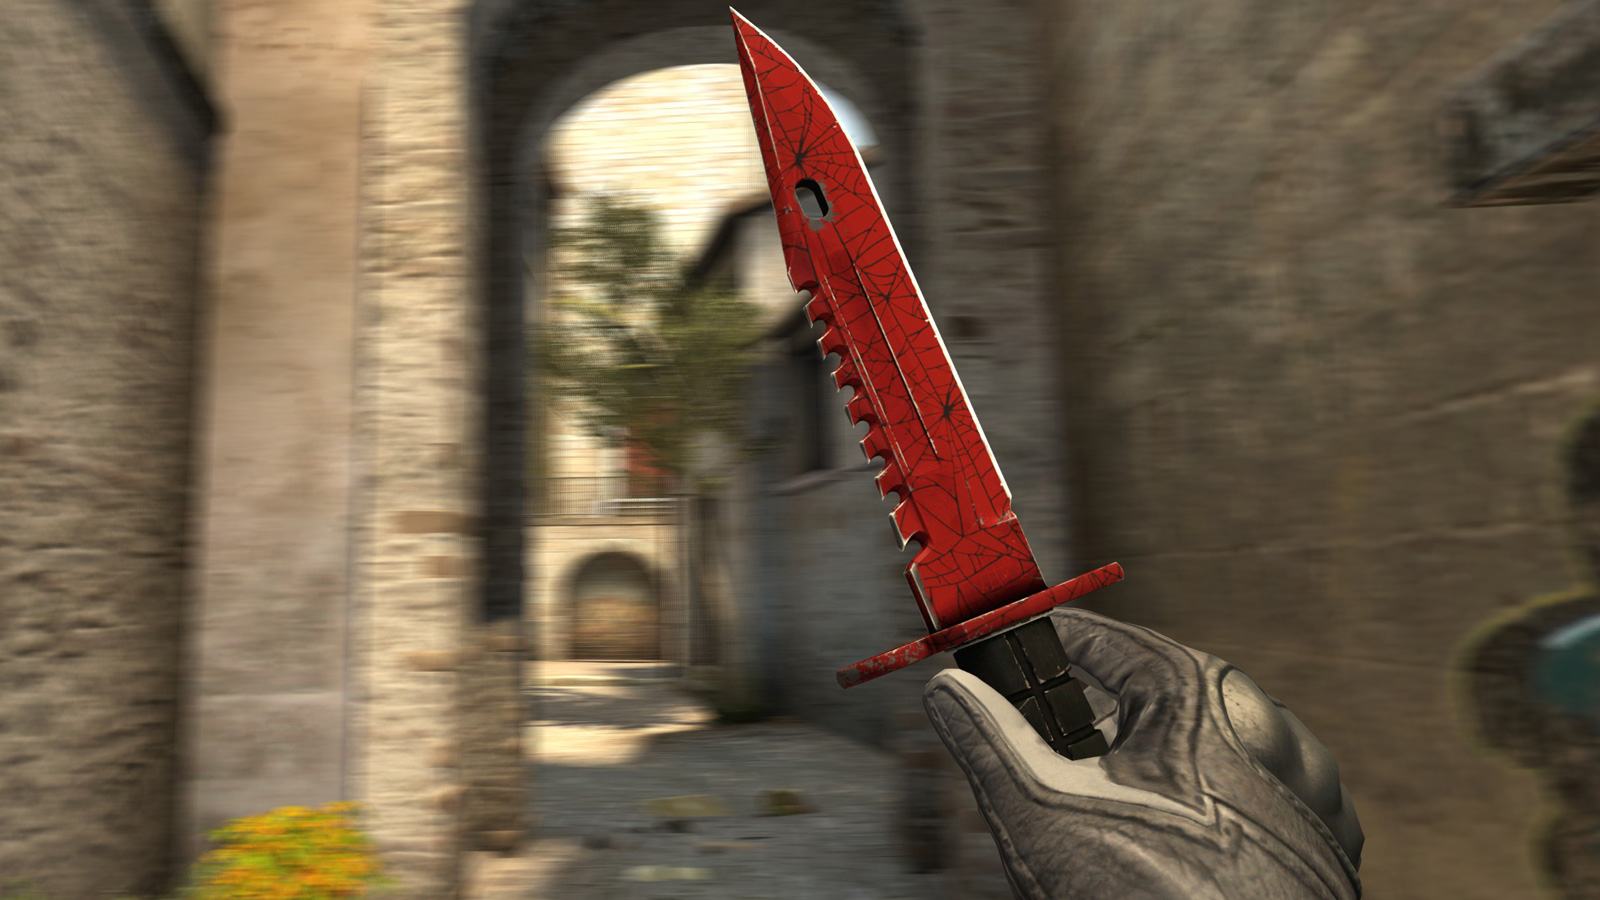 Odds of Getting a CS:GO Knife 